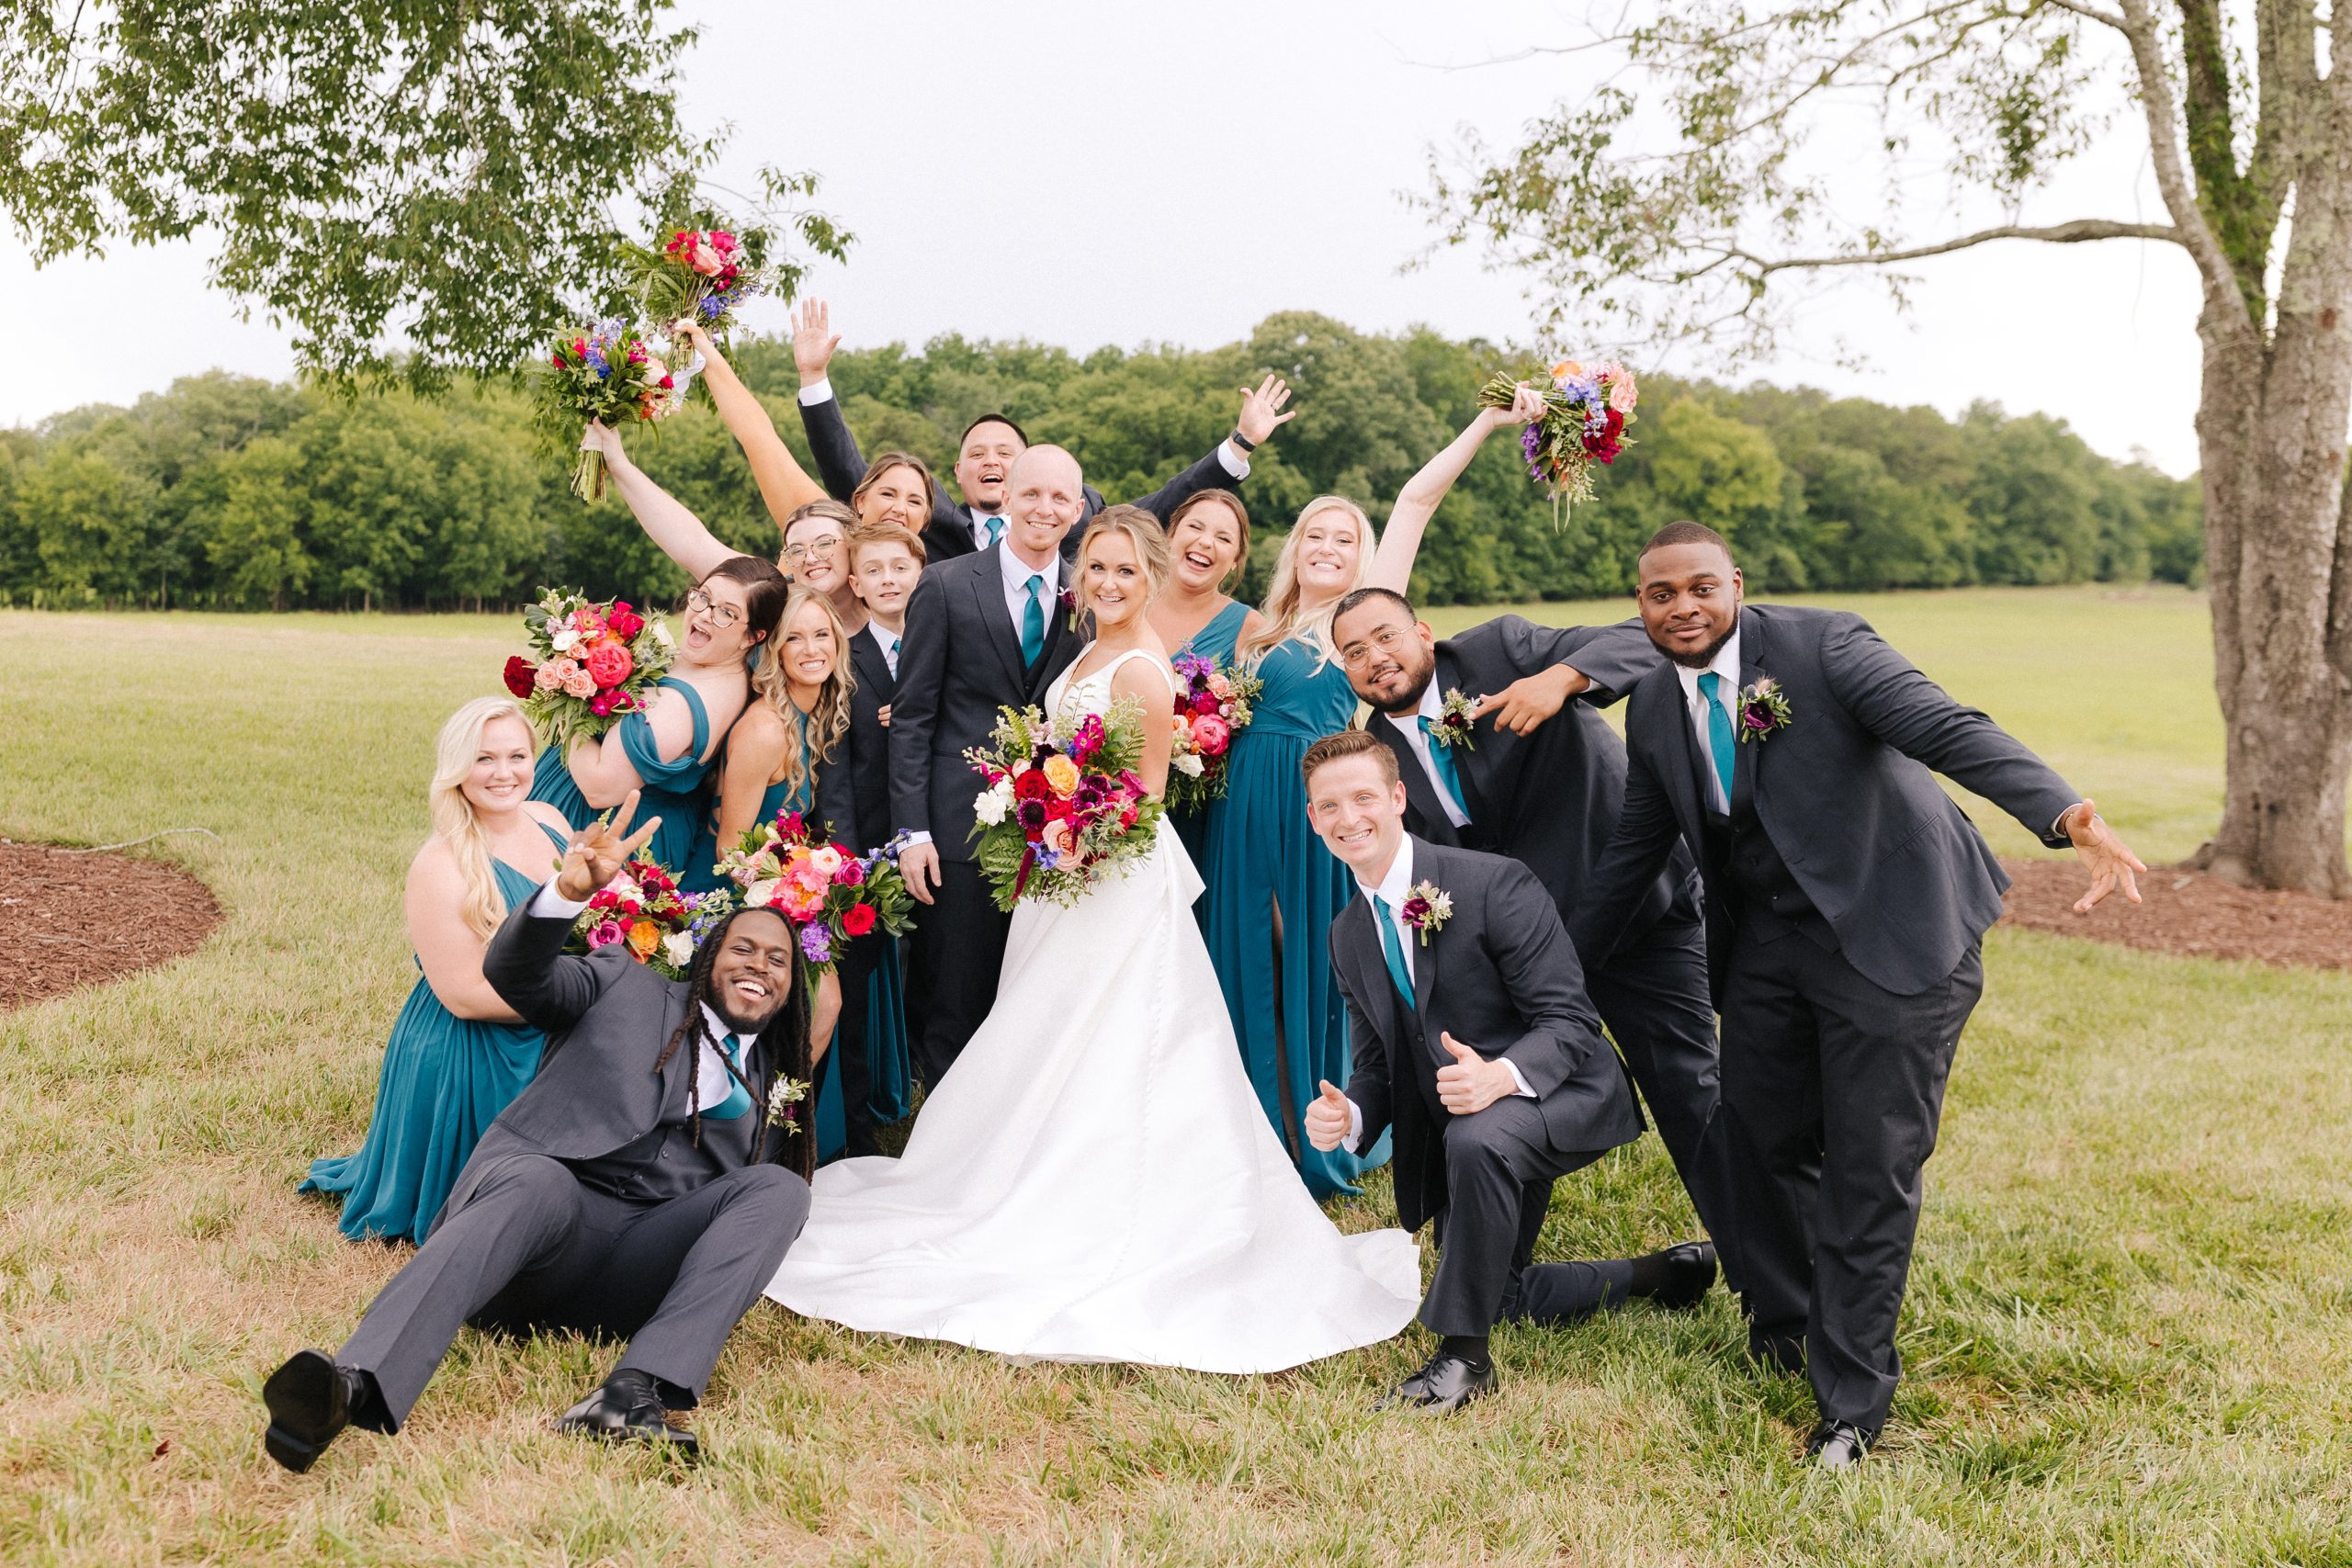 A couple celebrates with their wedding party on their wedding day at Board & Batten Events in Lexington, NC